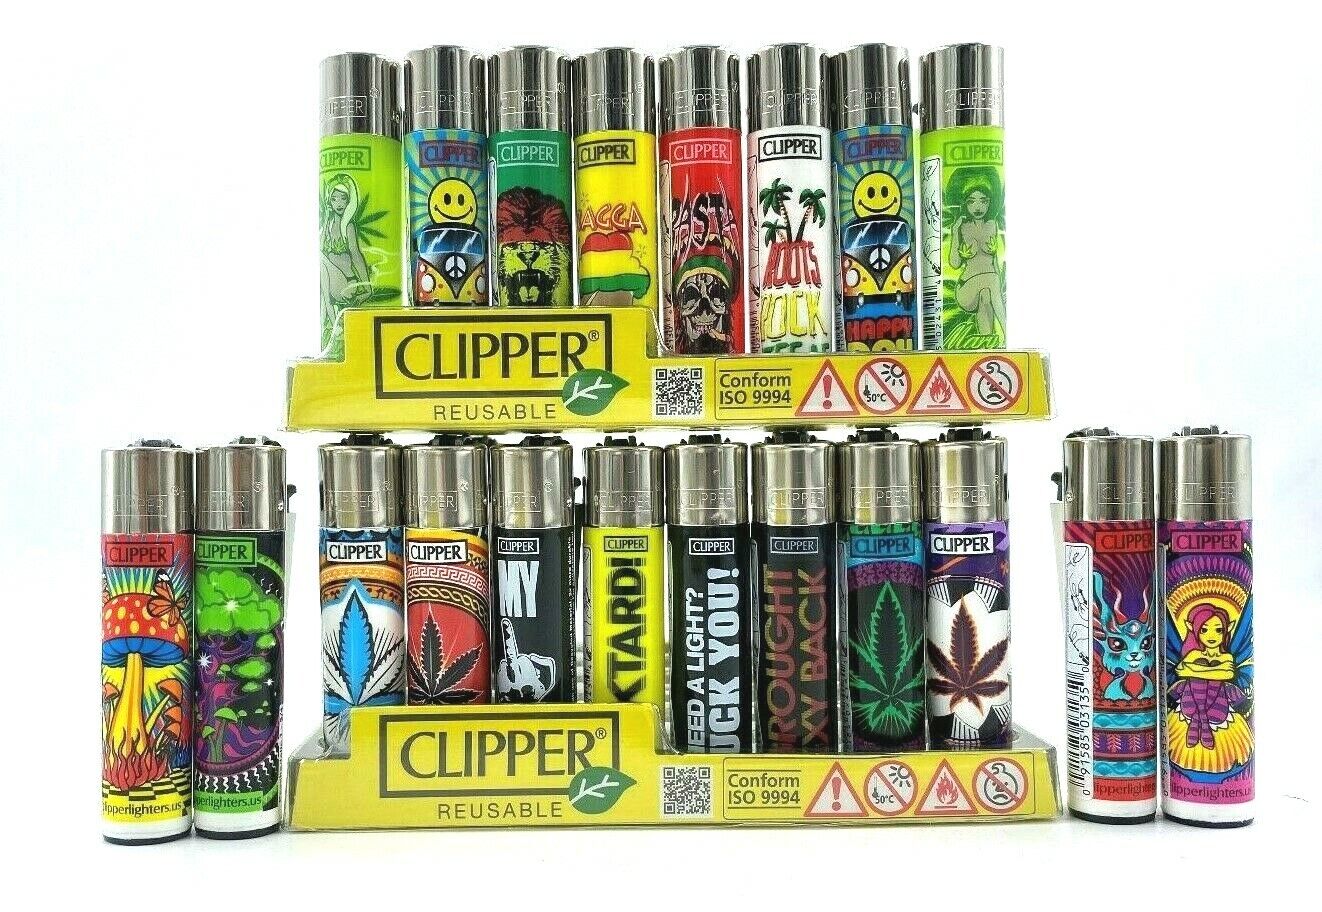 16 Pieces Big Size Clipper Flint Lighters Assorted Color Design Made in Spain 